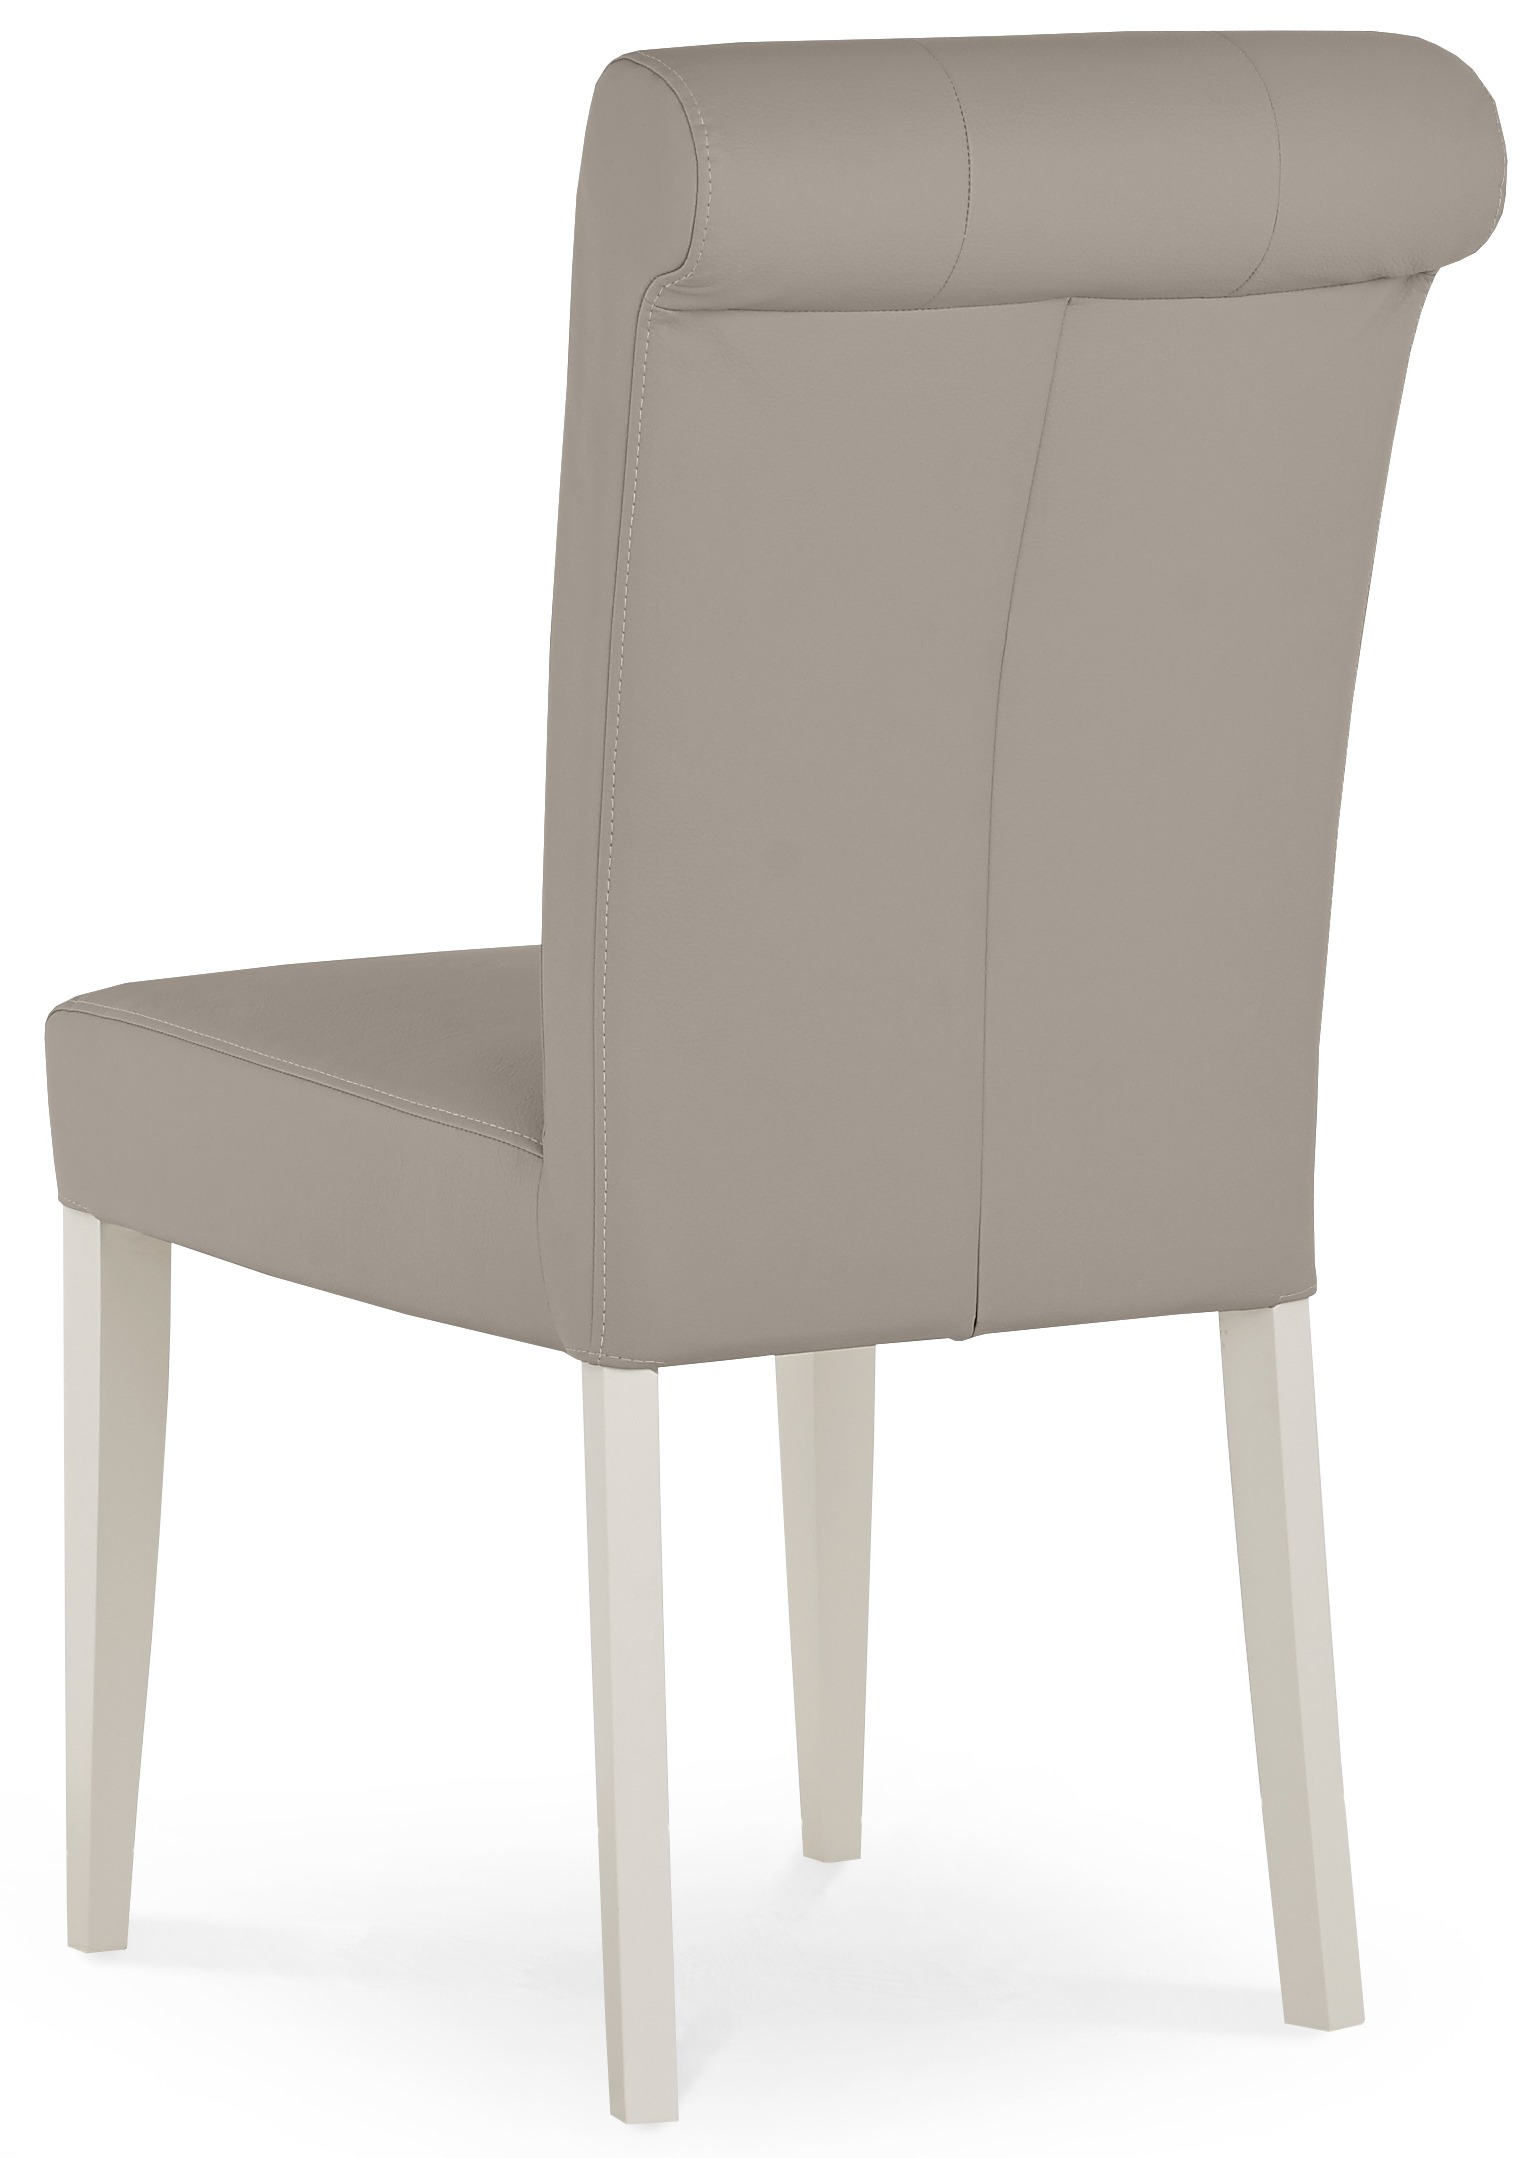 Montreux Soft Grey Upholstered Chair - Style Our Home